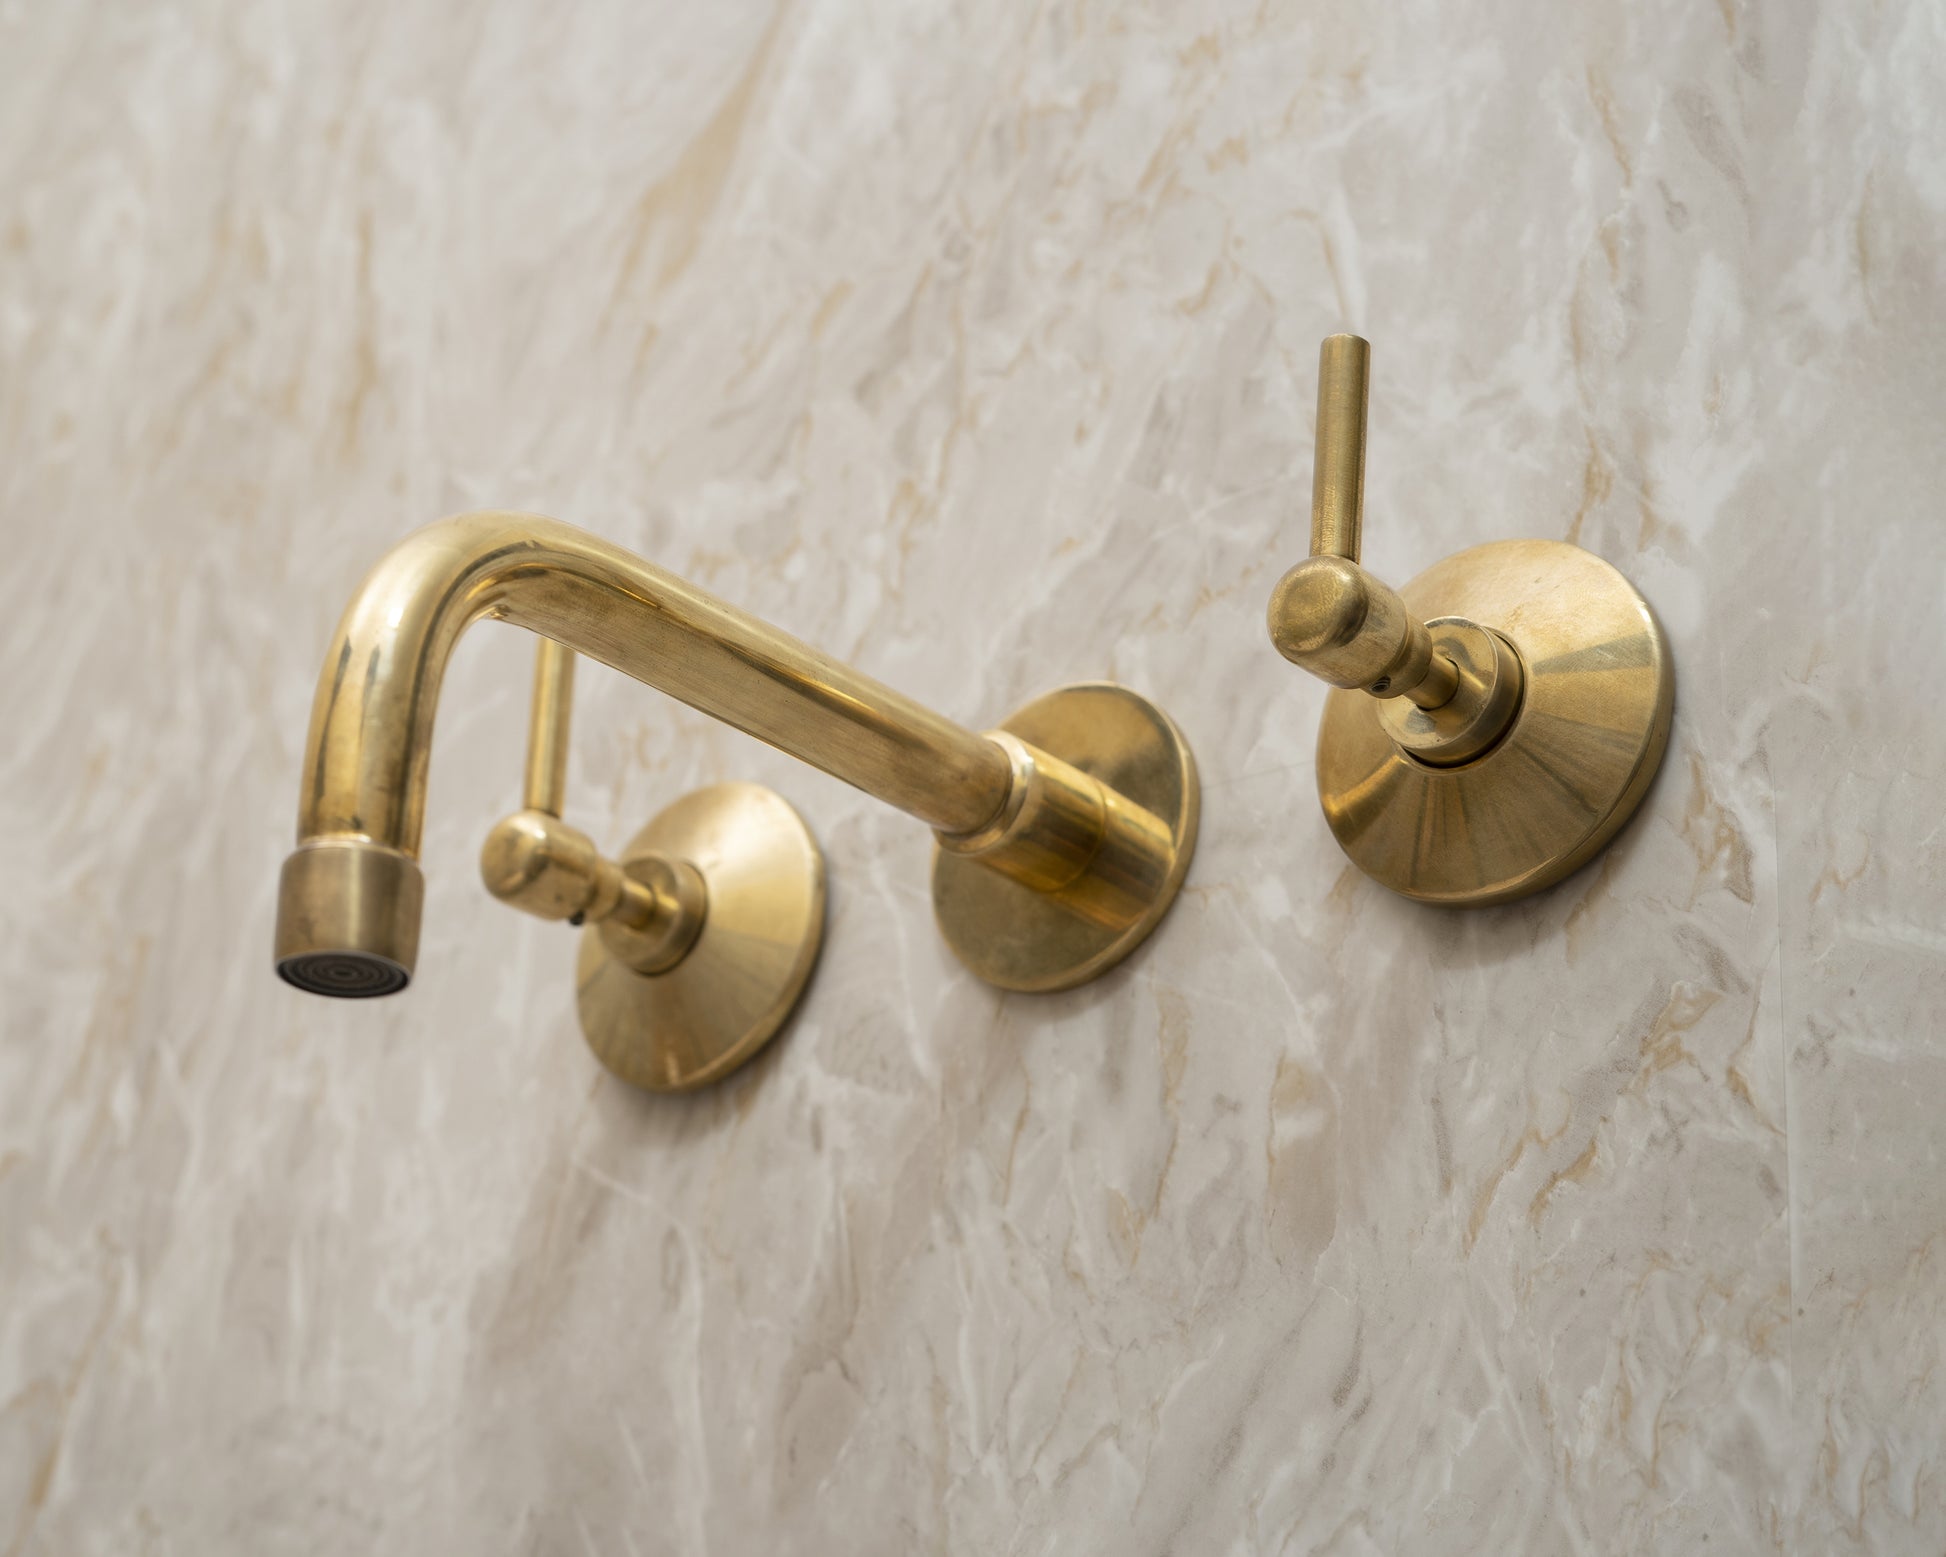 Unlacquered Brass Wall Mounted 3 Hole Bathroom Tub Filler Faucet Zayian